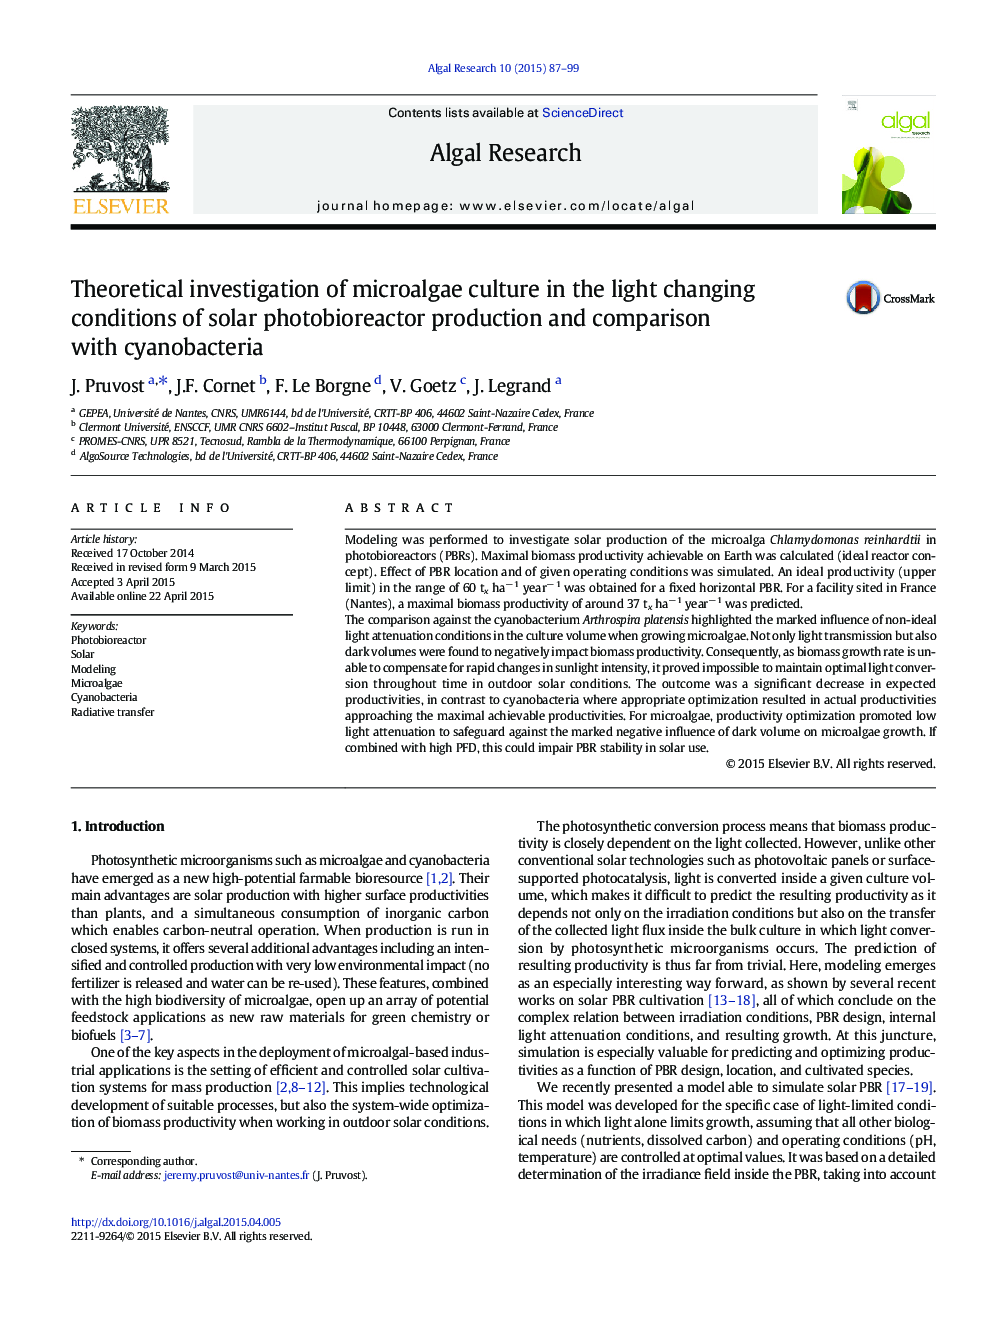 Theoretical investigation of microalgae culture in the light changing conditions of solar photobioreactor production and comparison with cyanobacteria